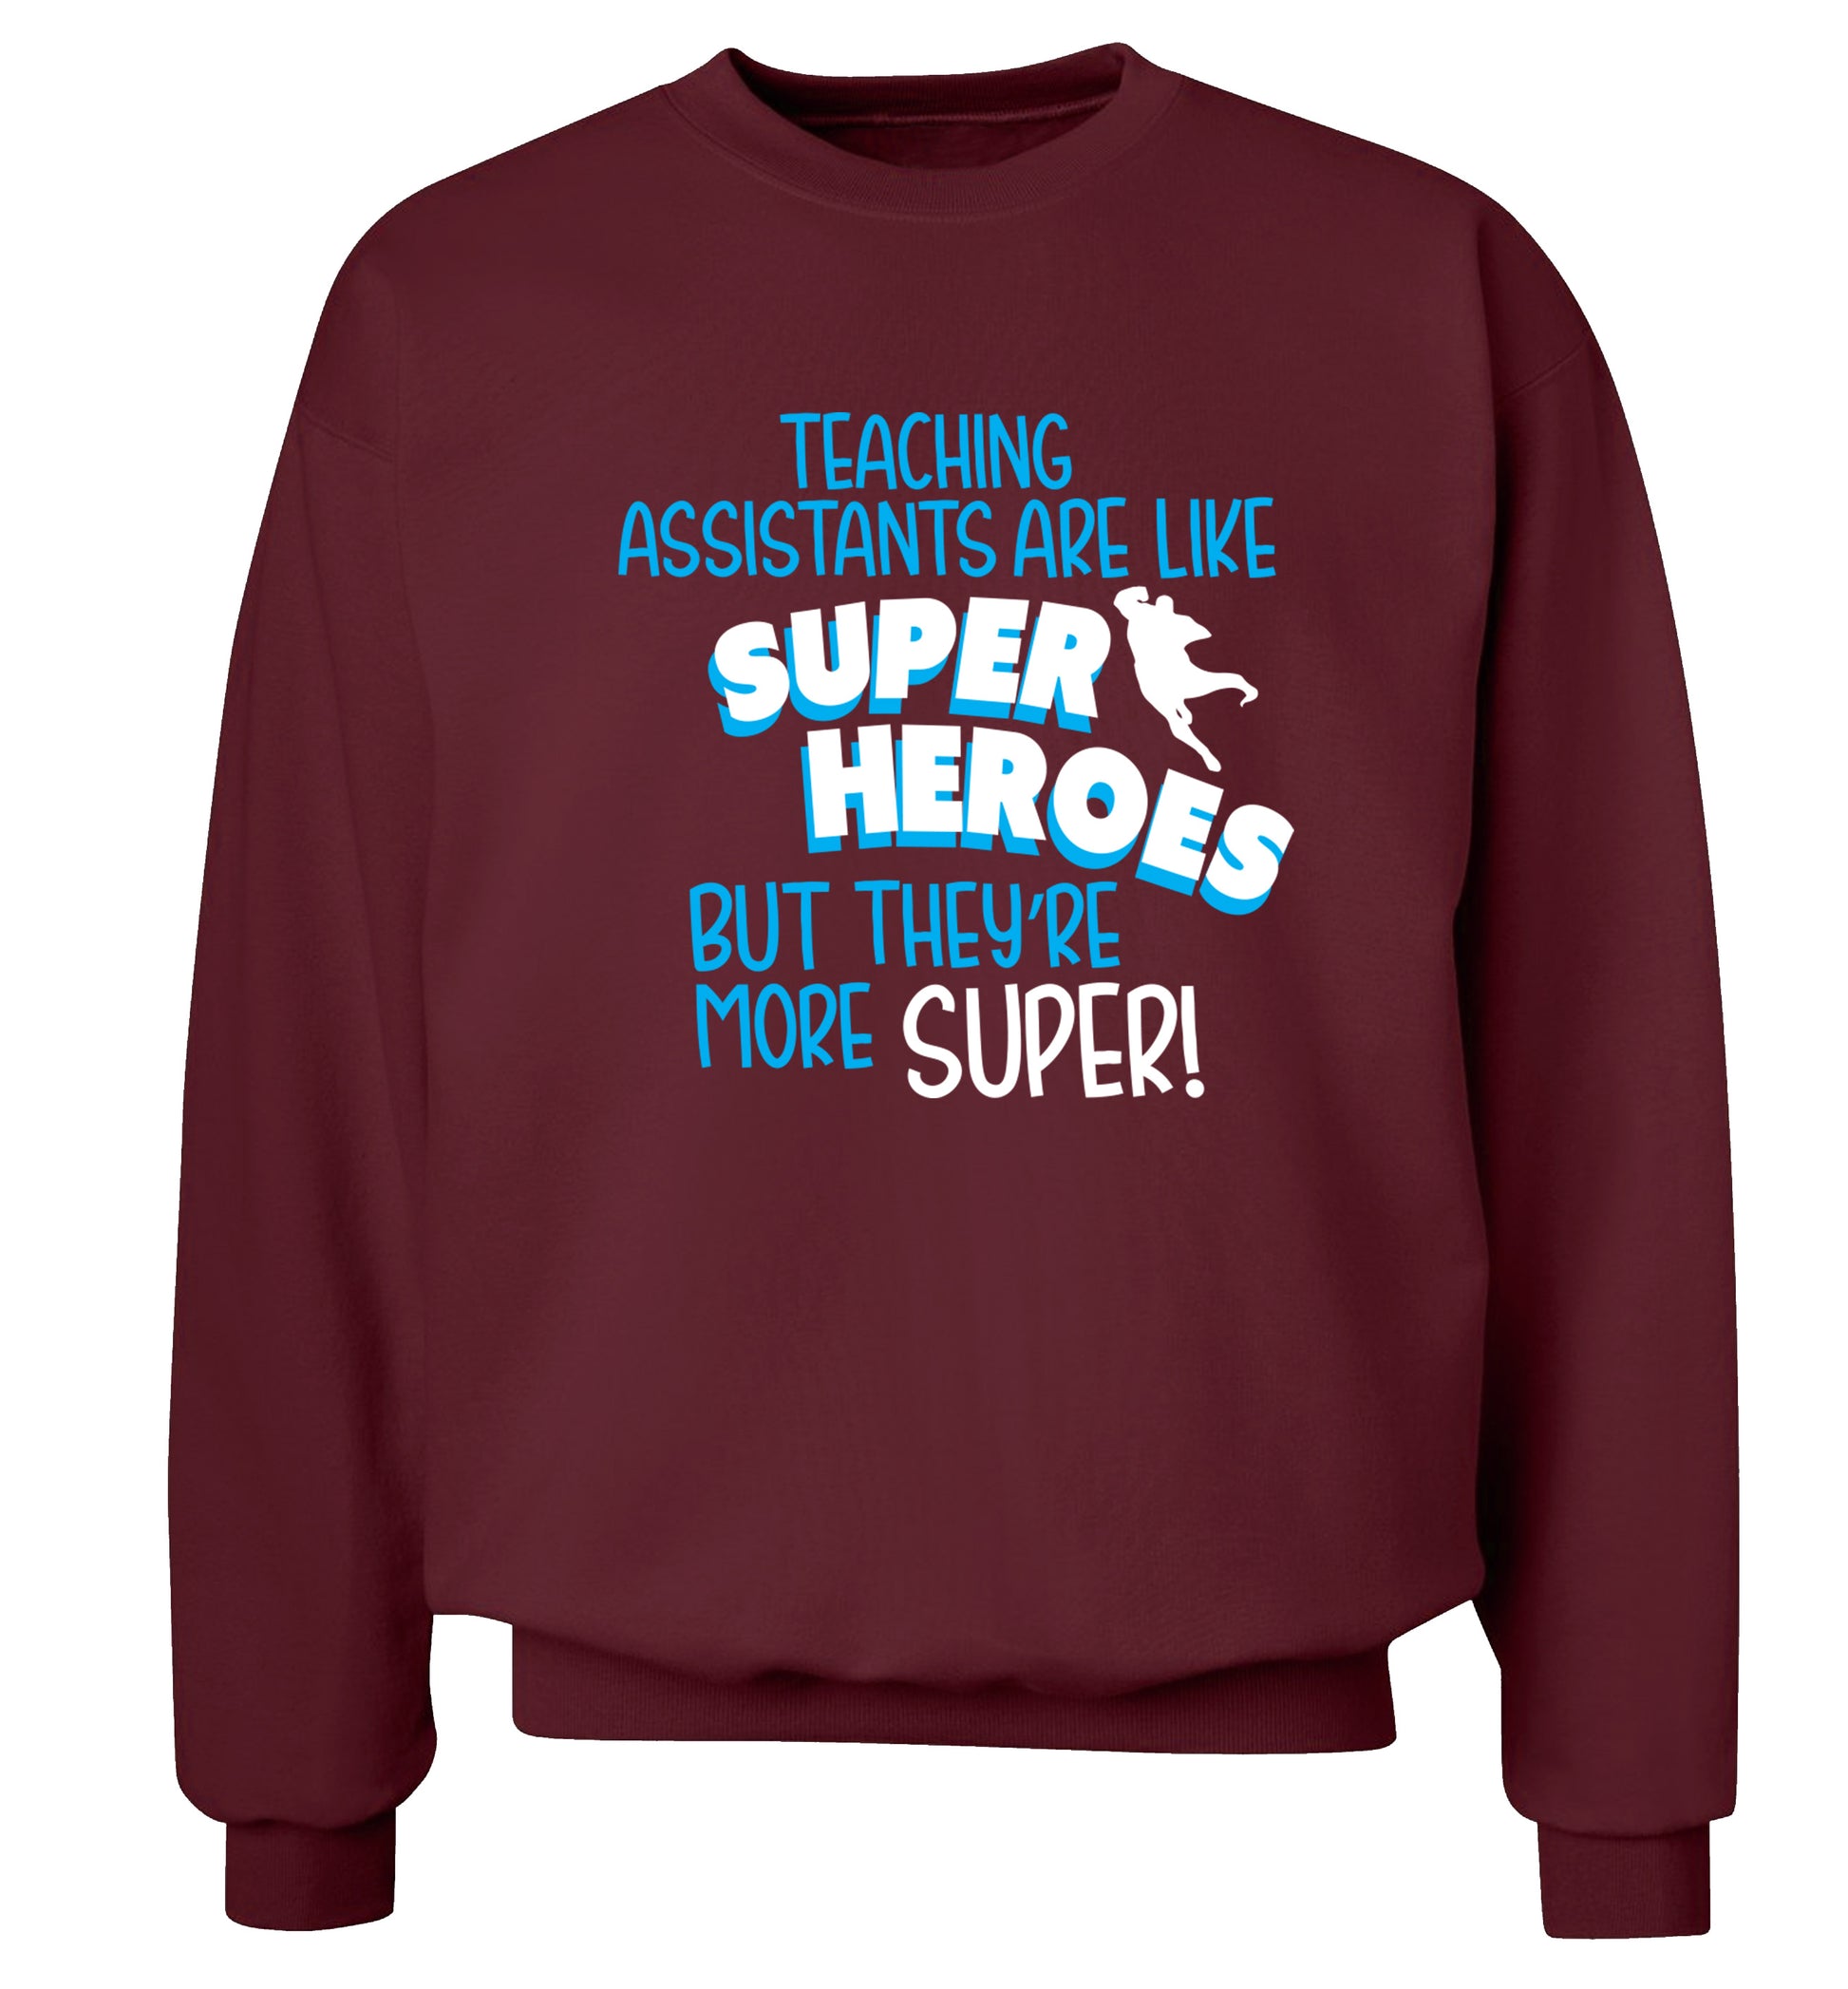 Teaching assistants are like superheros but they're more super Adult's unisex maroon Sweater 2XL